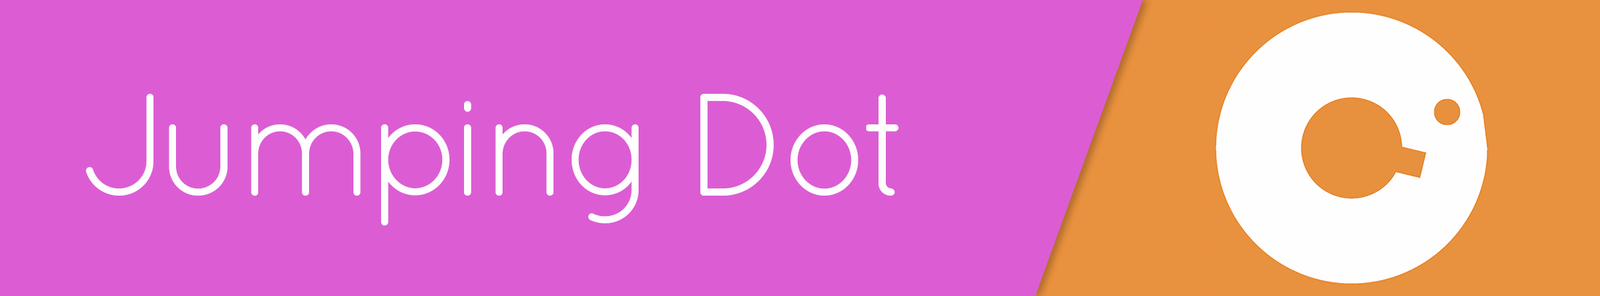 Two Dots - Admob + Leaderboards + Share - 16